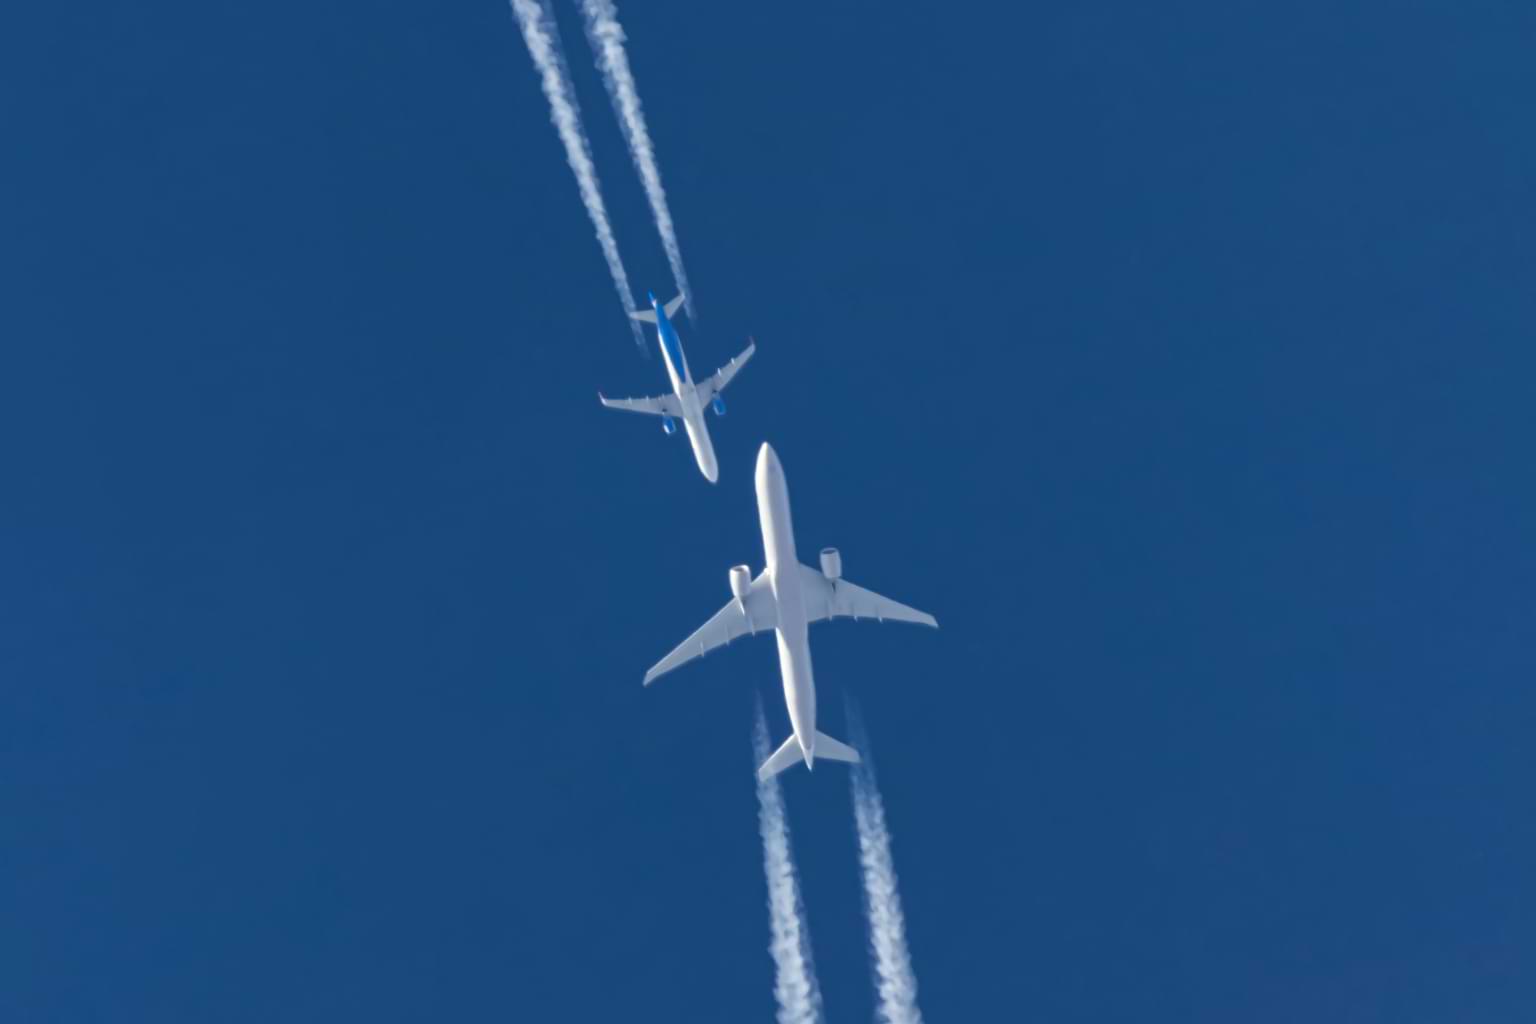 Against a clear blue sky, two white commercial planes appear headed toward each other, an illustration of the increasing number of airline close calls reported over the last month. © By berkut_34/stock.adobe.com